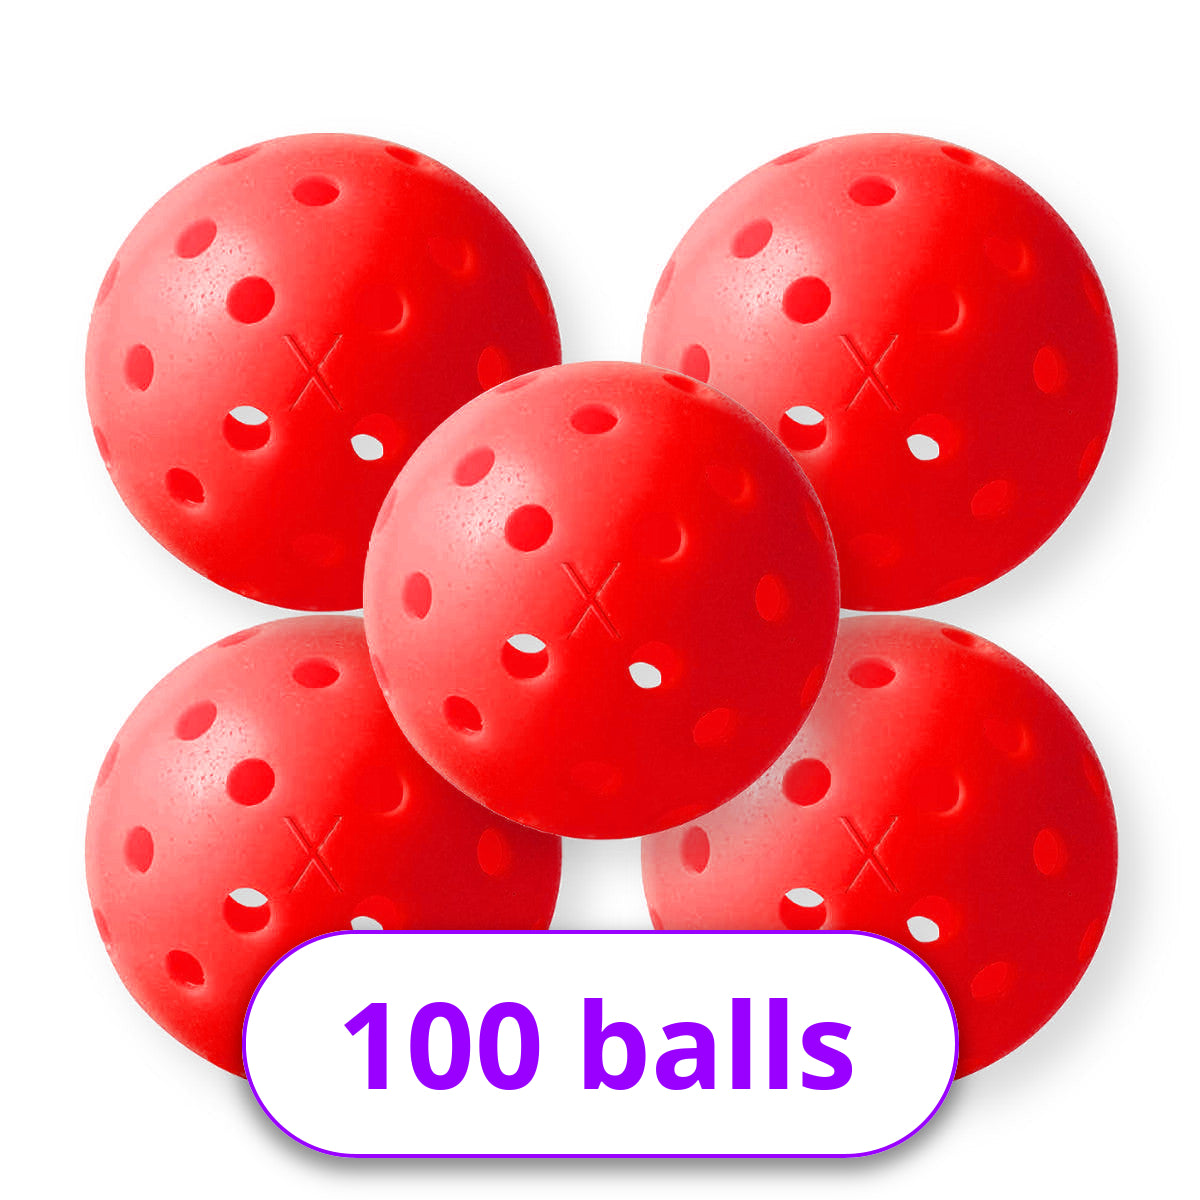 A pack of 100 Franklin X-40 Outdoor Pickleball Balls with holes on them.